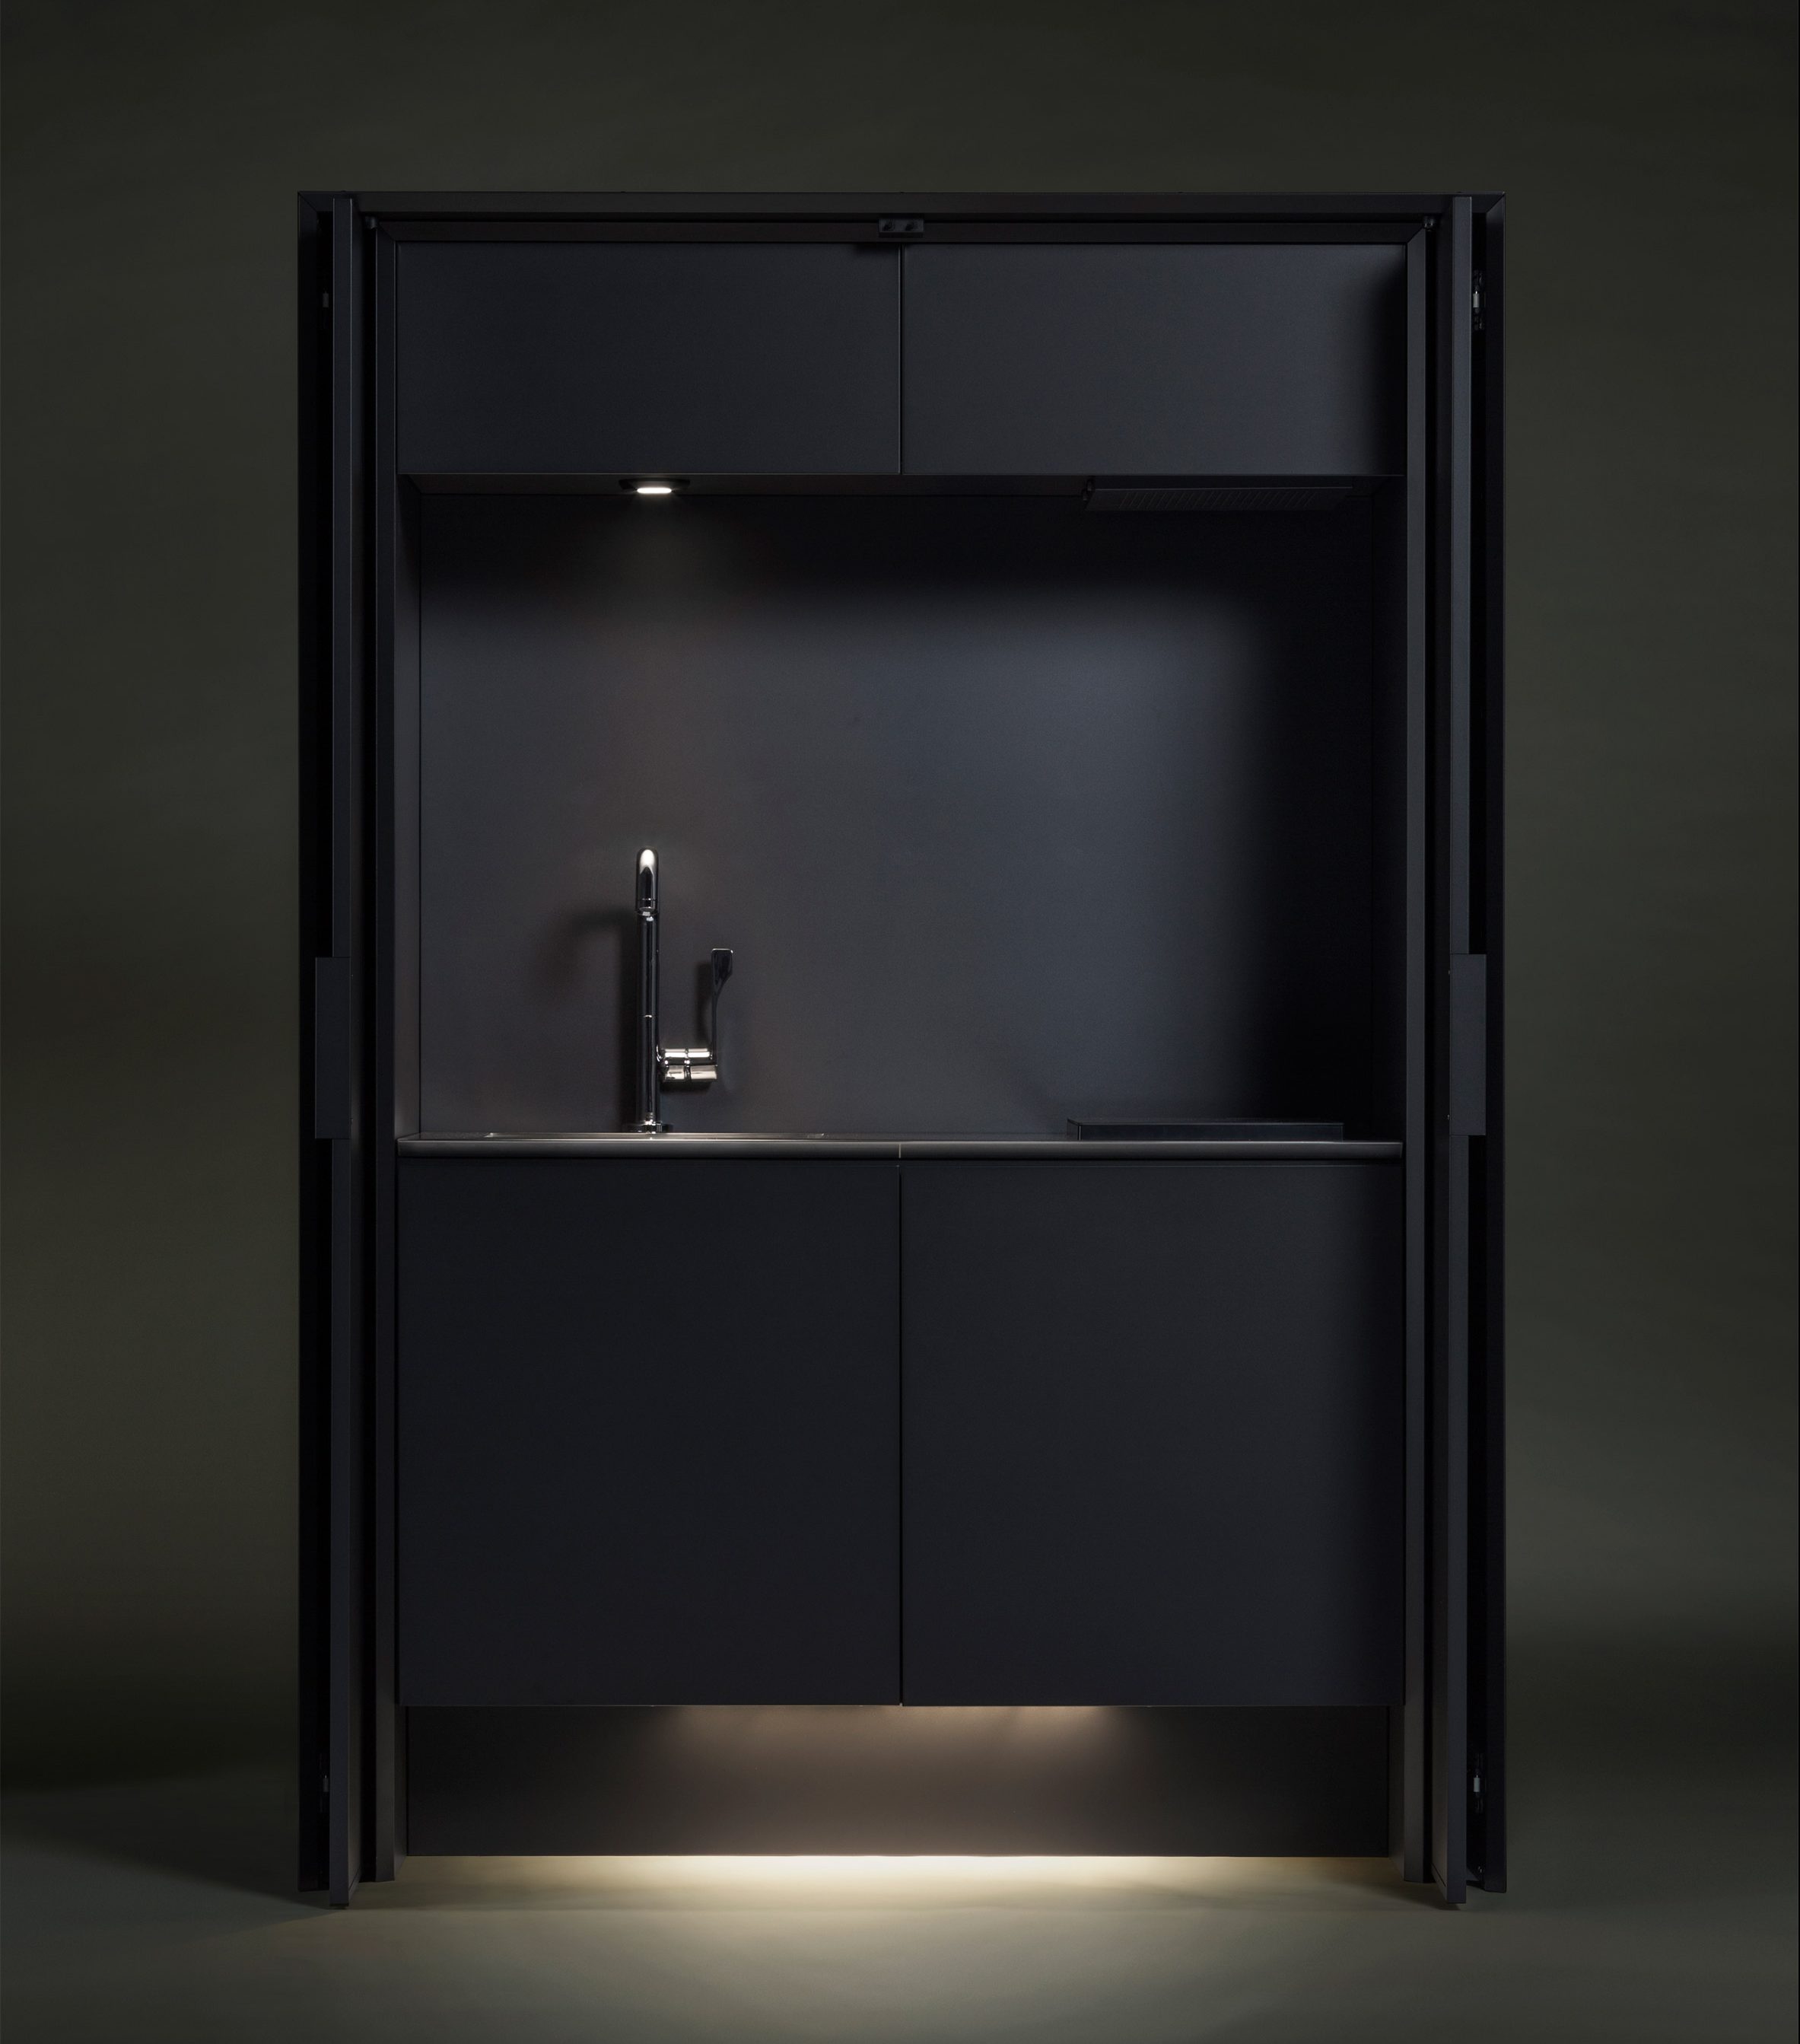 Affilato Hide unit has a sink and cooking area with lights, it can be closed like a wardrobe to keep the kitchen uncluttered